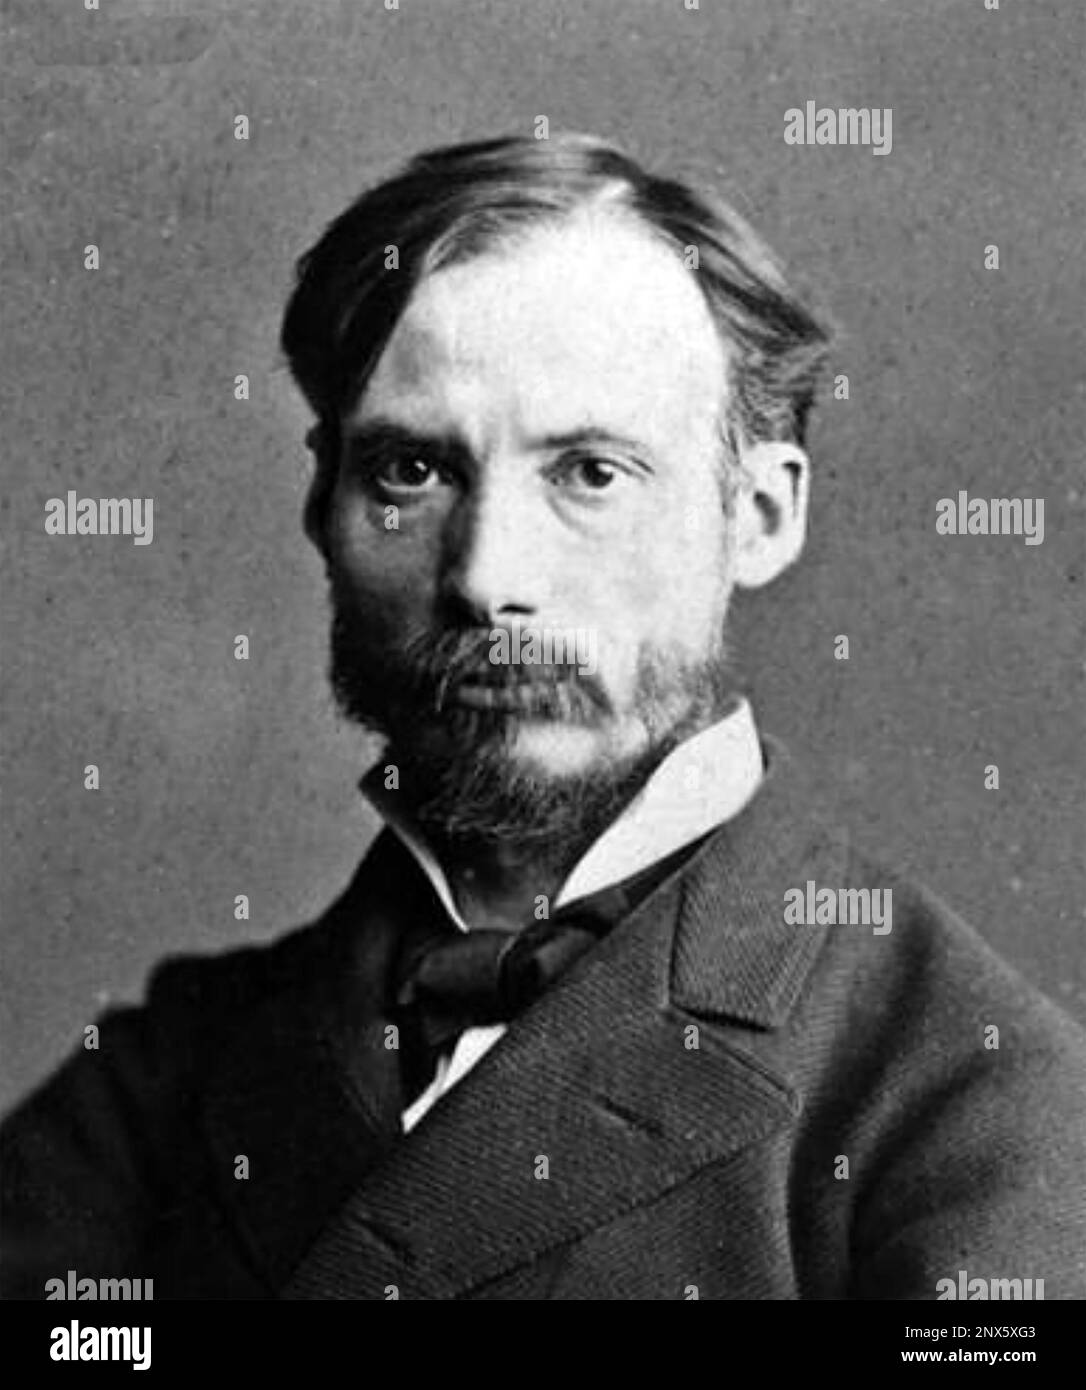 PIERRE-AUGUSTE RENOIR (1841-1919) French painter, about 1875 Stock Photo